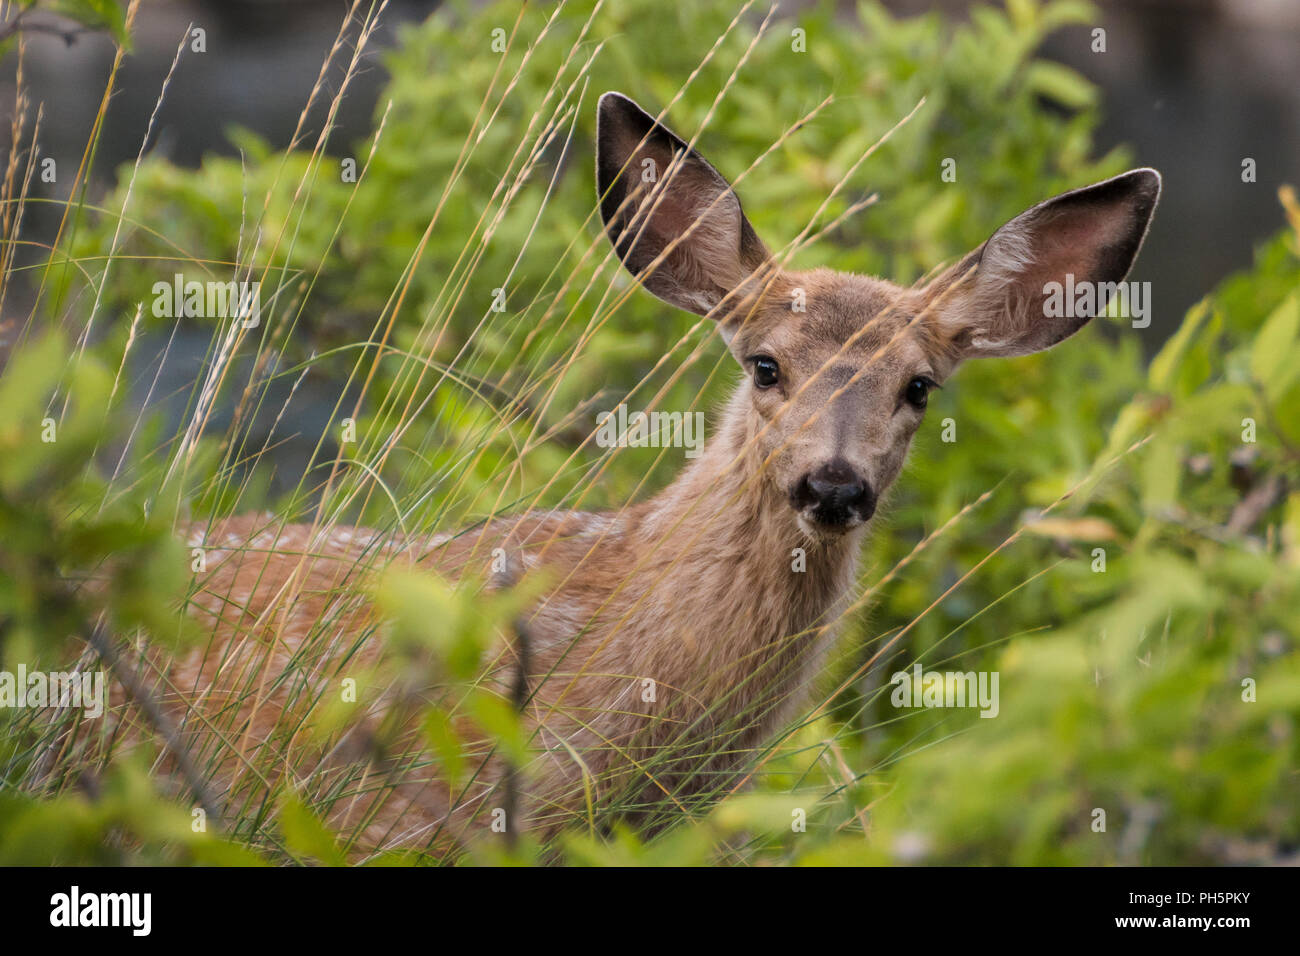 Hirsch fawn am Ufer des Snake River in Hells Canyon National Recreation Area. Zeile Abenteuer. Stockfoto